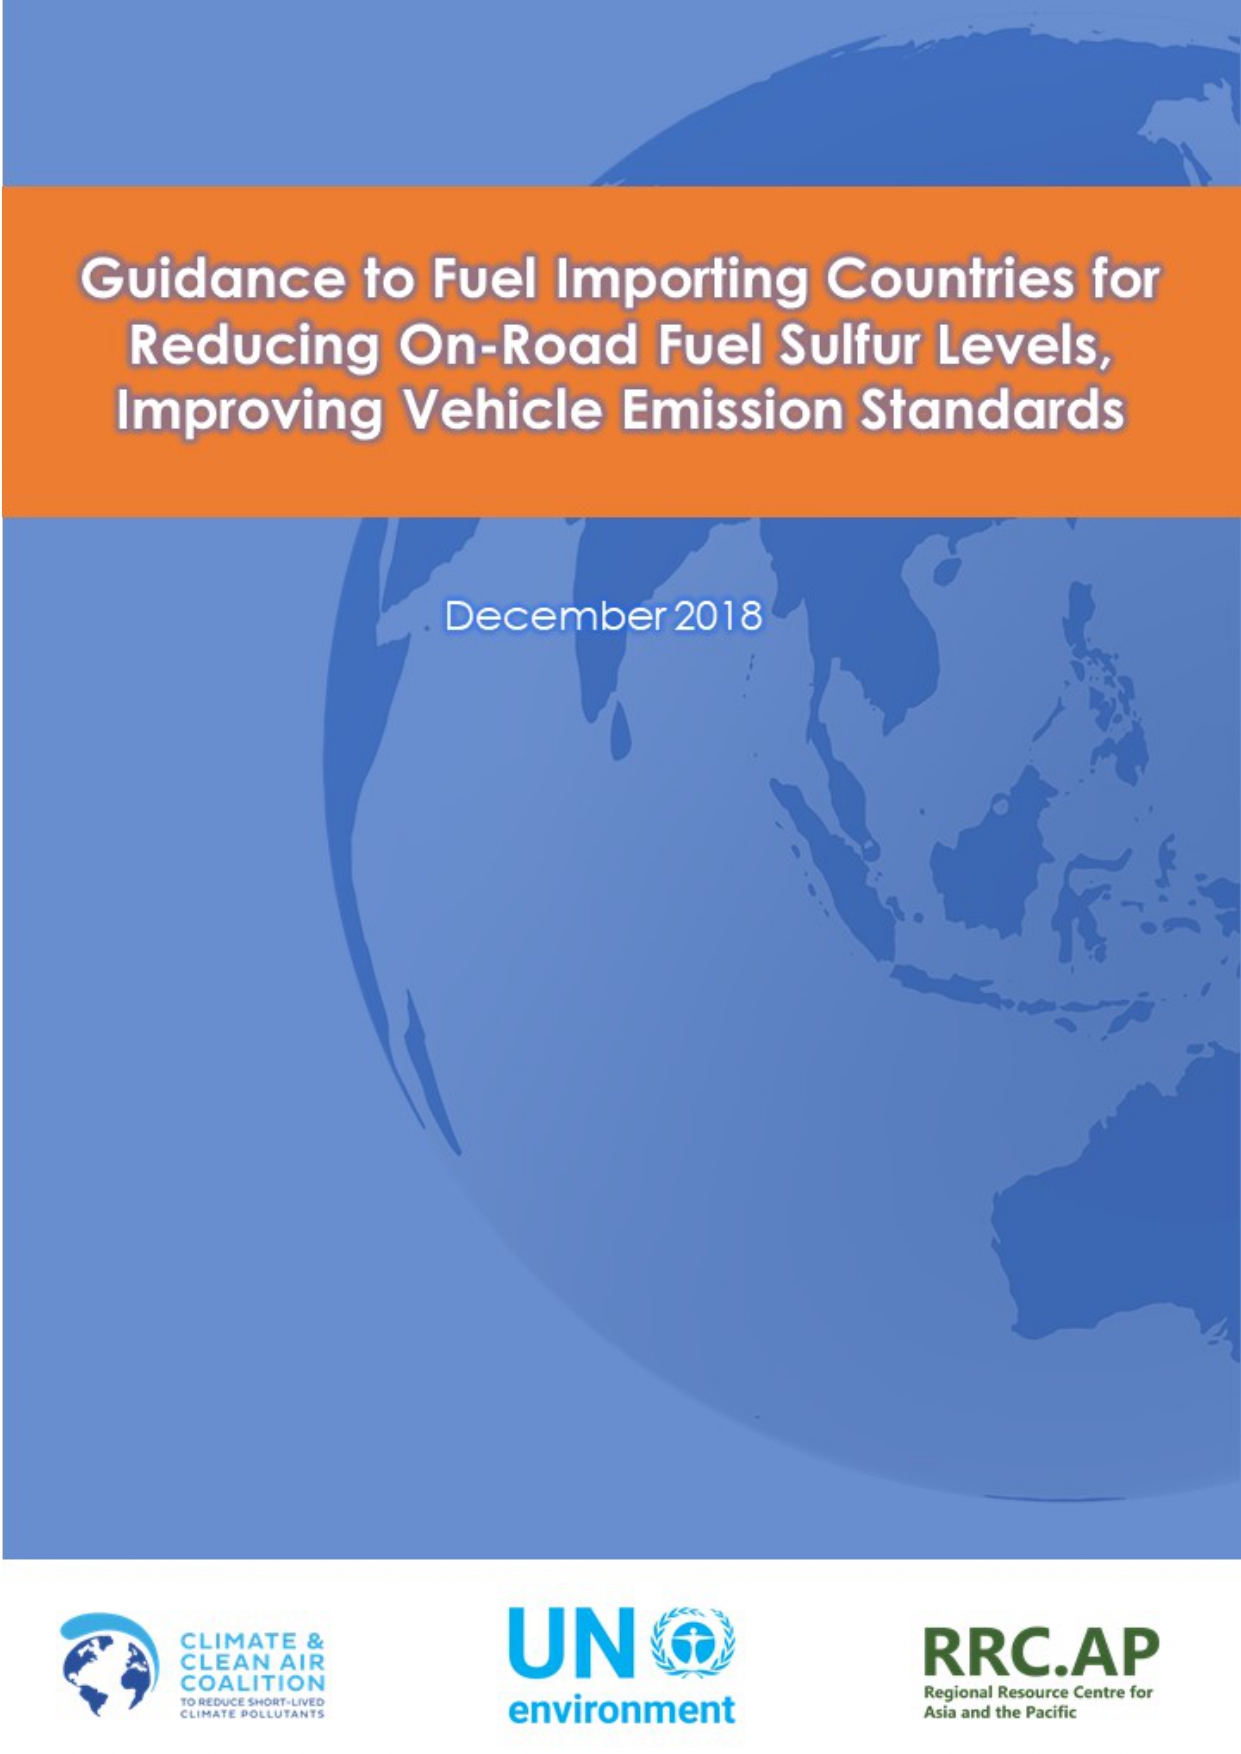 image/Guidance_to_Fuel_Importing_Countries_for_Reducing_On-Road_Fuel_Sulfur_Levels_Impro_vA4P1VF.jpg